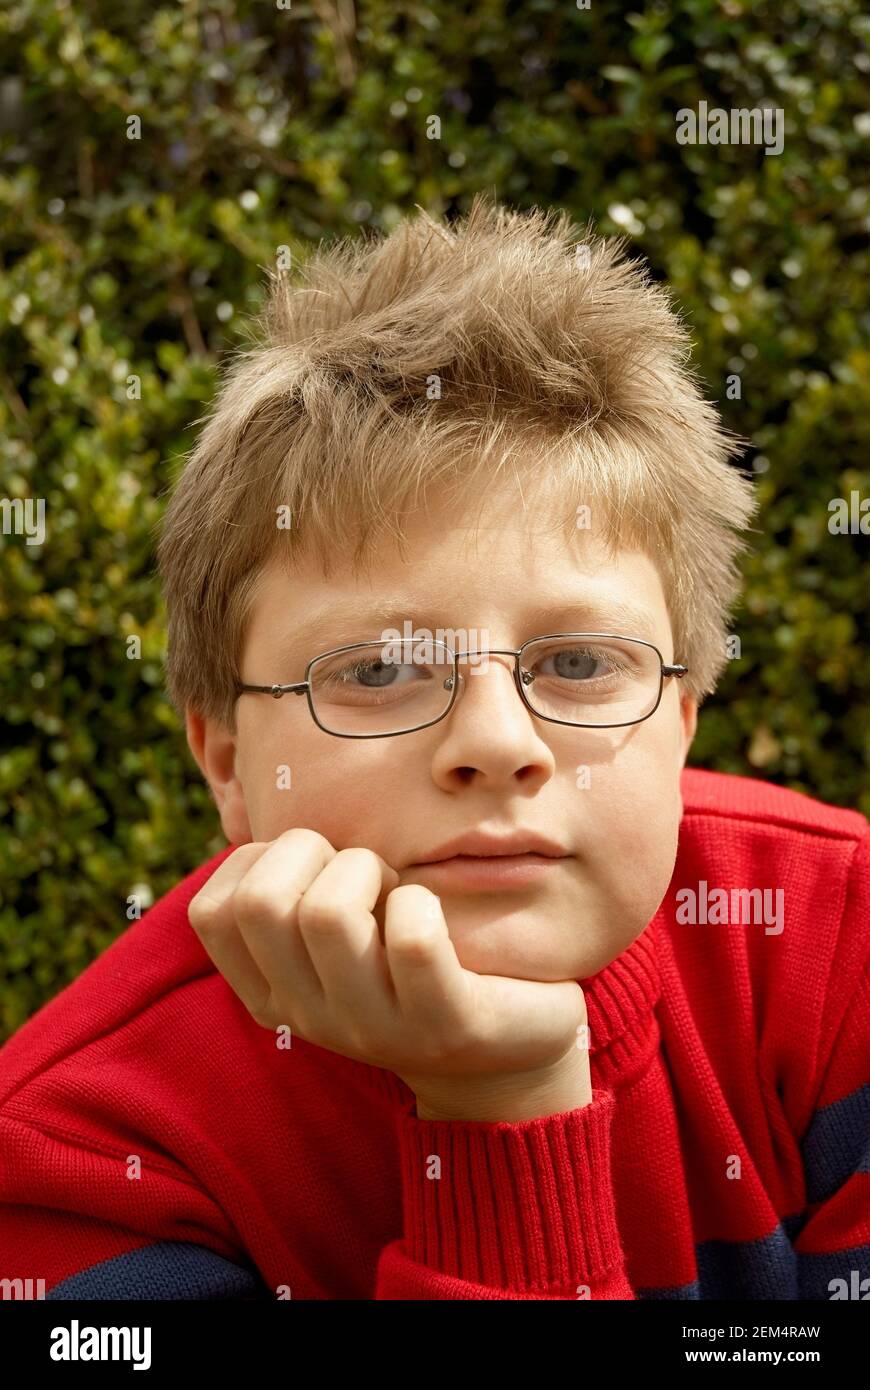 Portrait of a boy with his hand on his chin Stock Photo